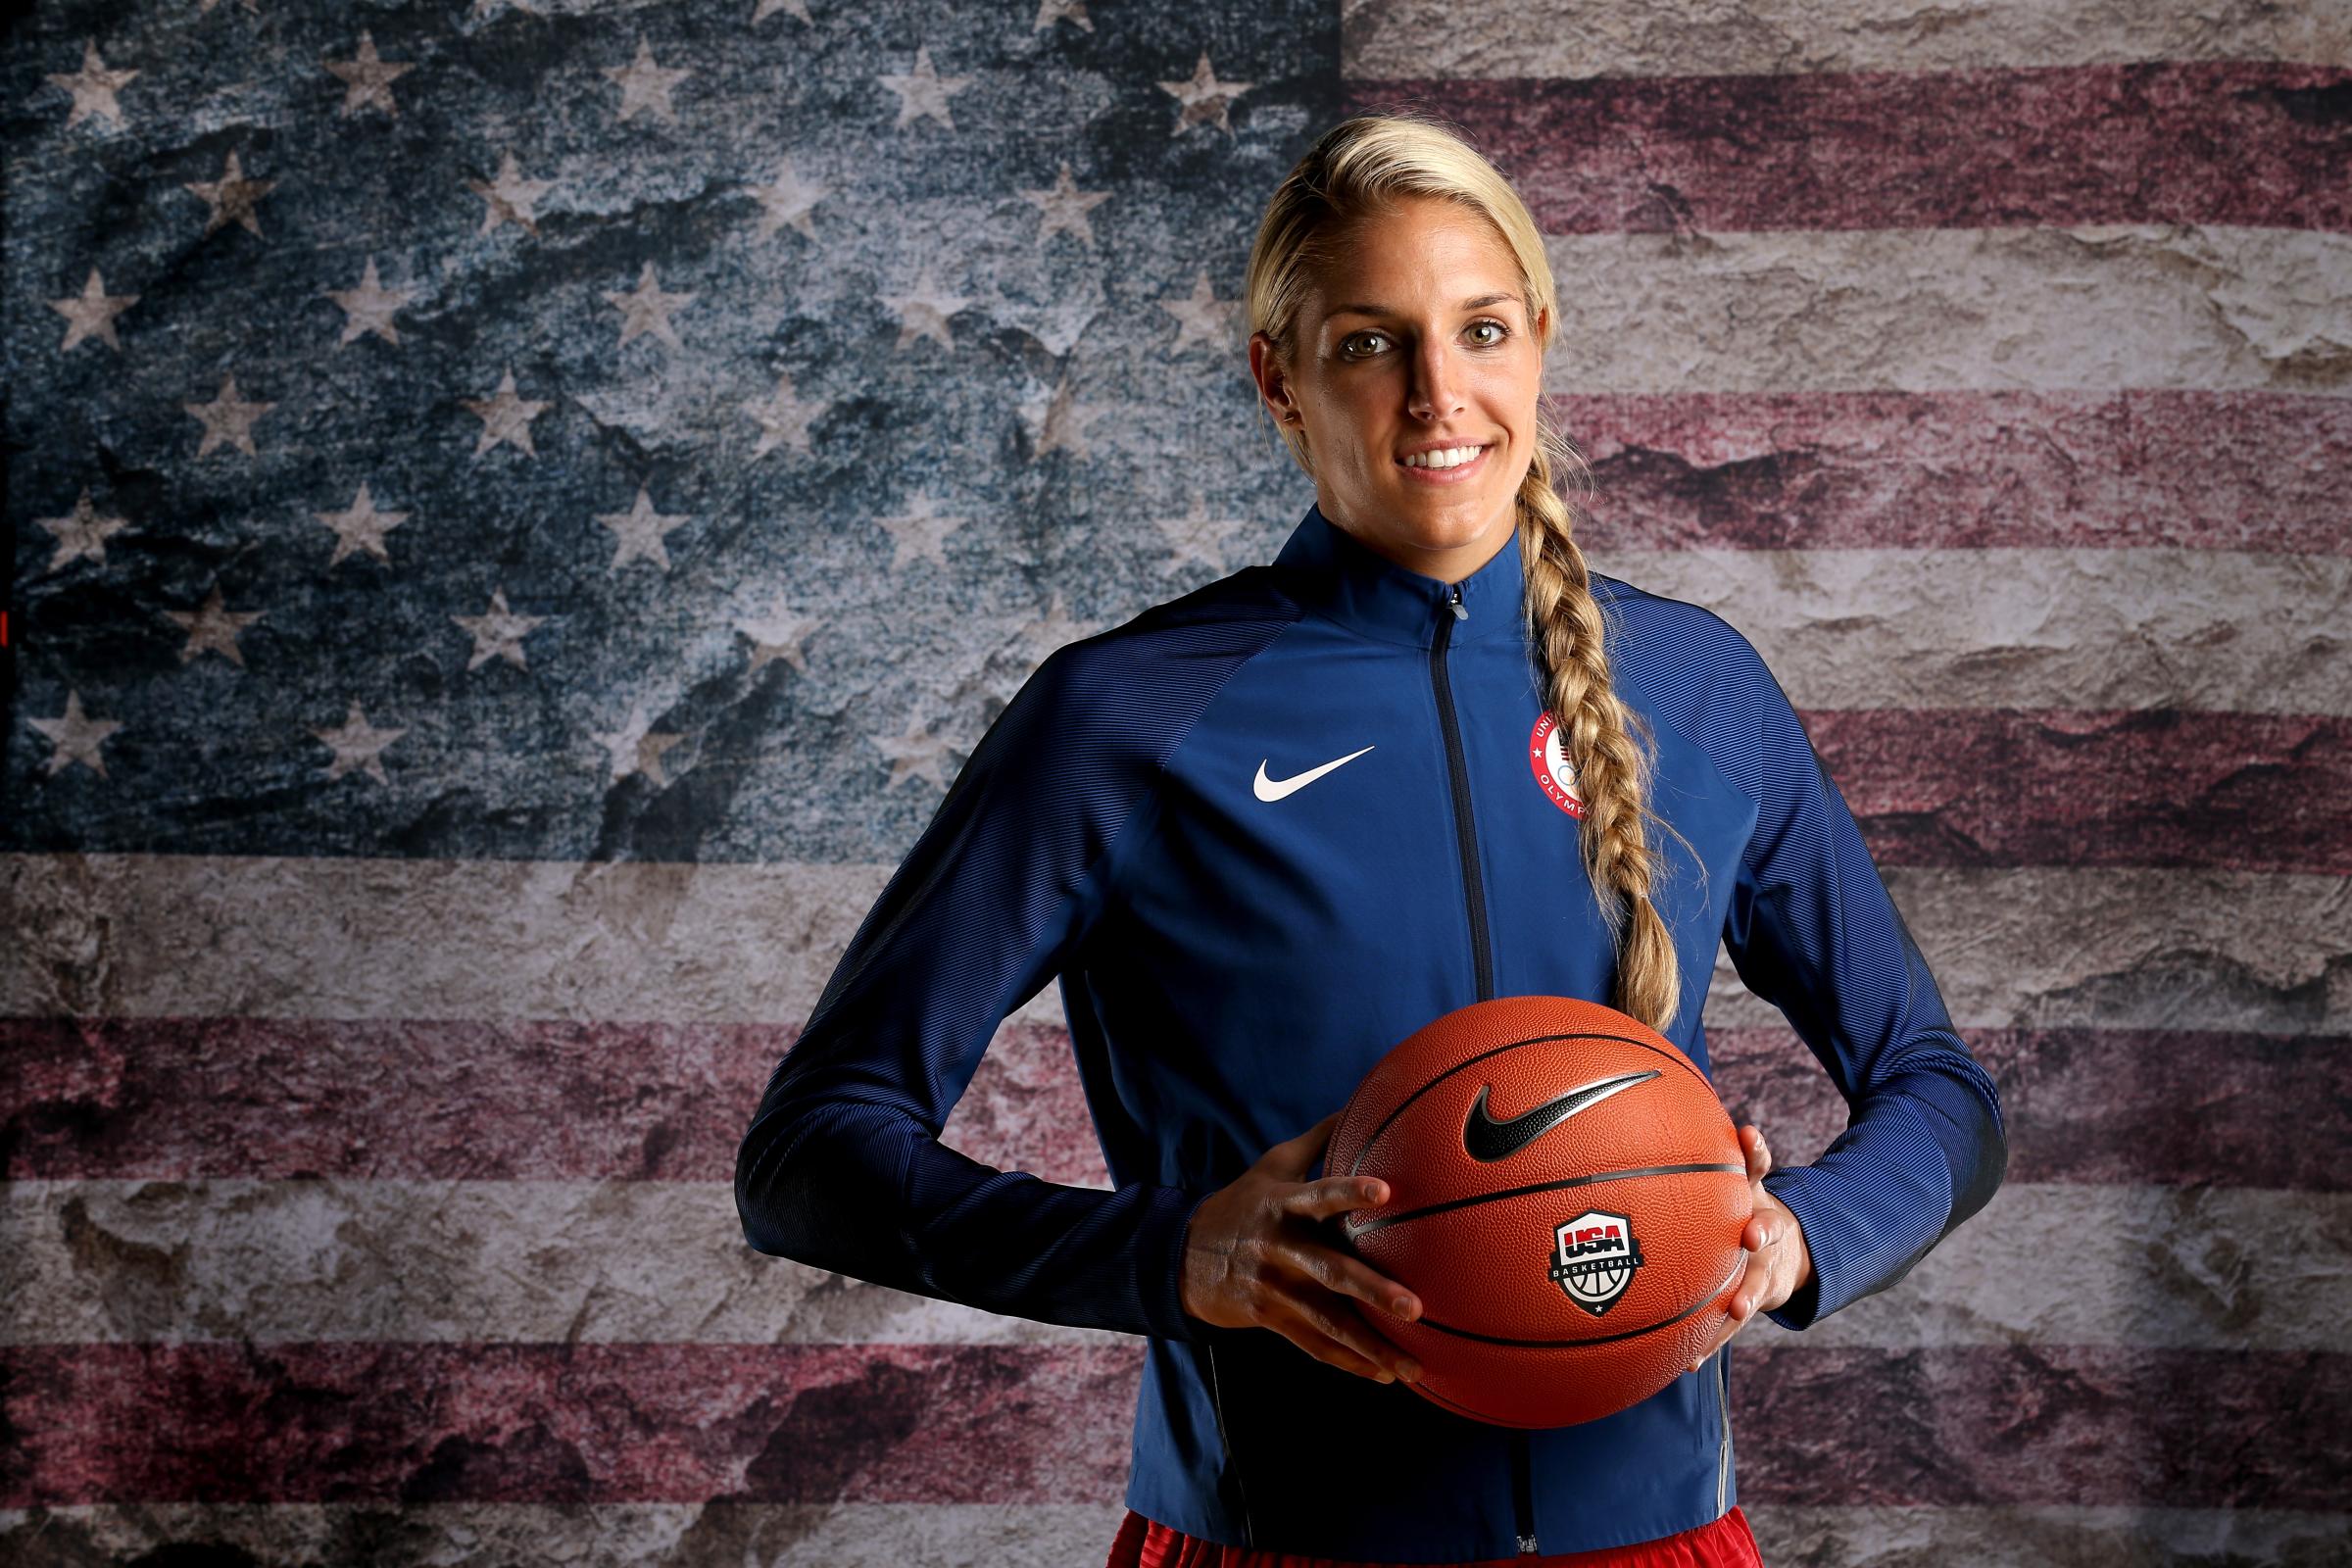 Elena Delle Donne at the 2016 Team USA Media Summit in Beverly Hills, Calif. on March 9, 2016.